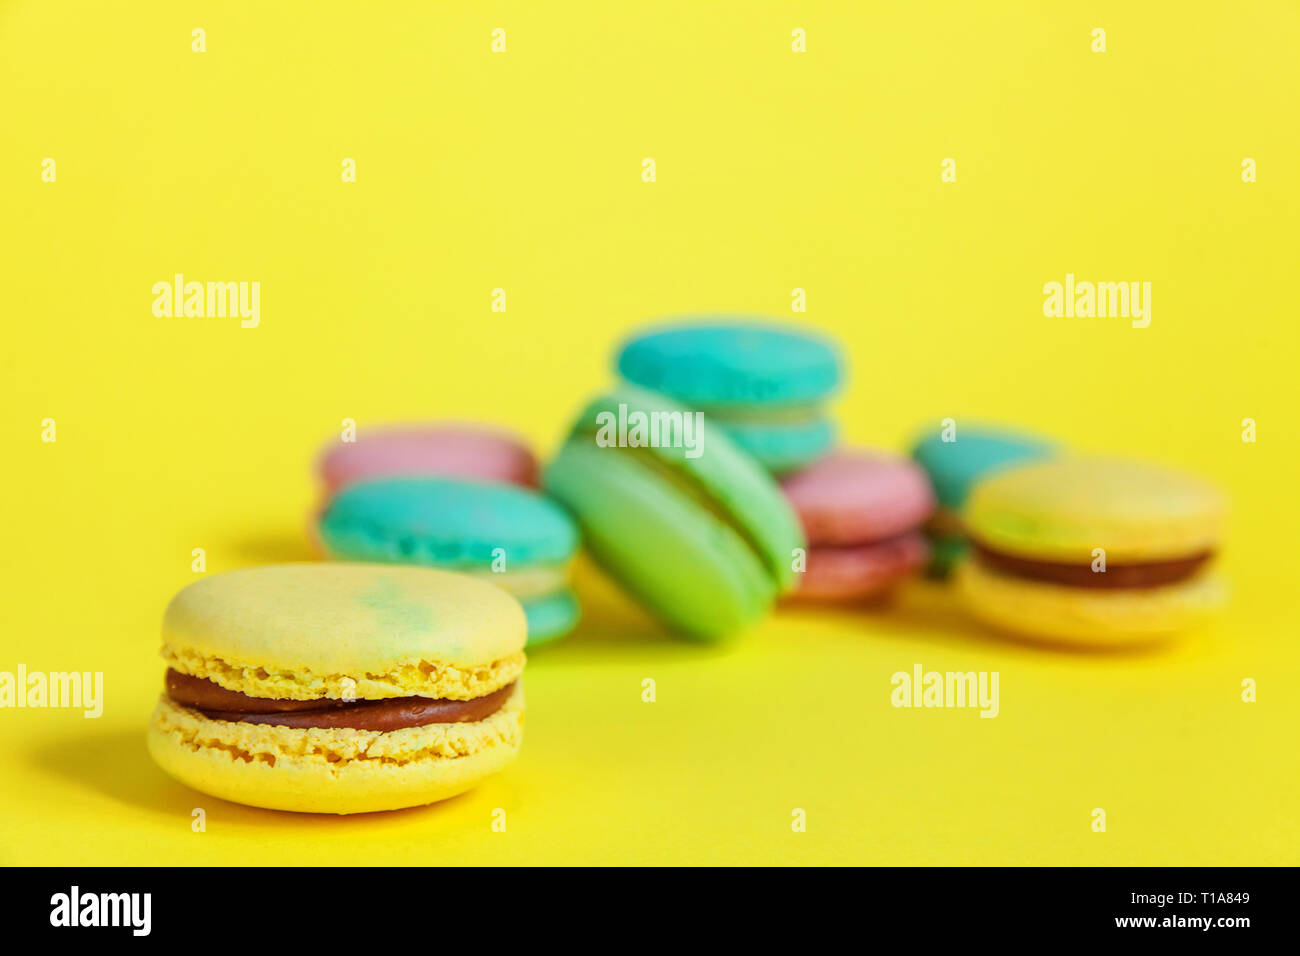 Sweet almond colorful unicorn pink blue yellow green macaron or macaroon dessert cake isolated on trendy yellow modern fashion background. French swee Stock Photo